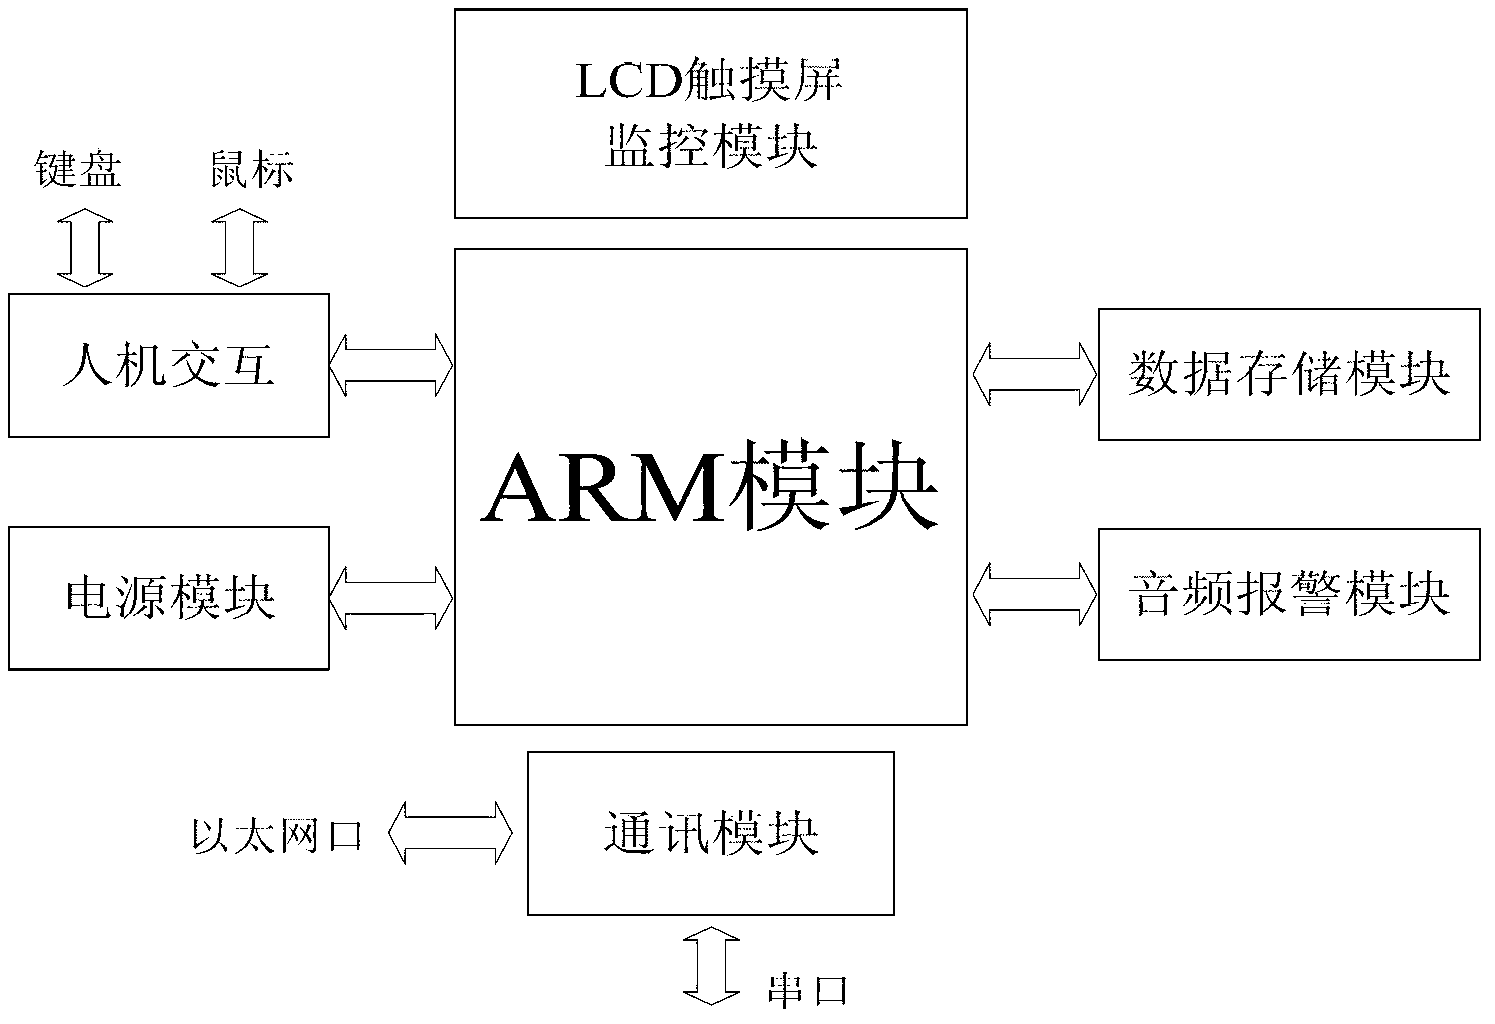 Fan state online monitoring system and method based on advanced reduced instruction-set computer machine (ARM) and ZigBee